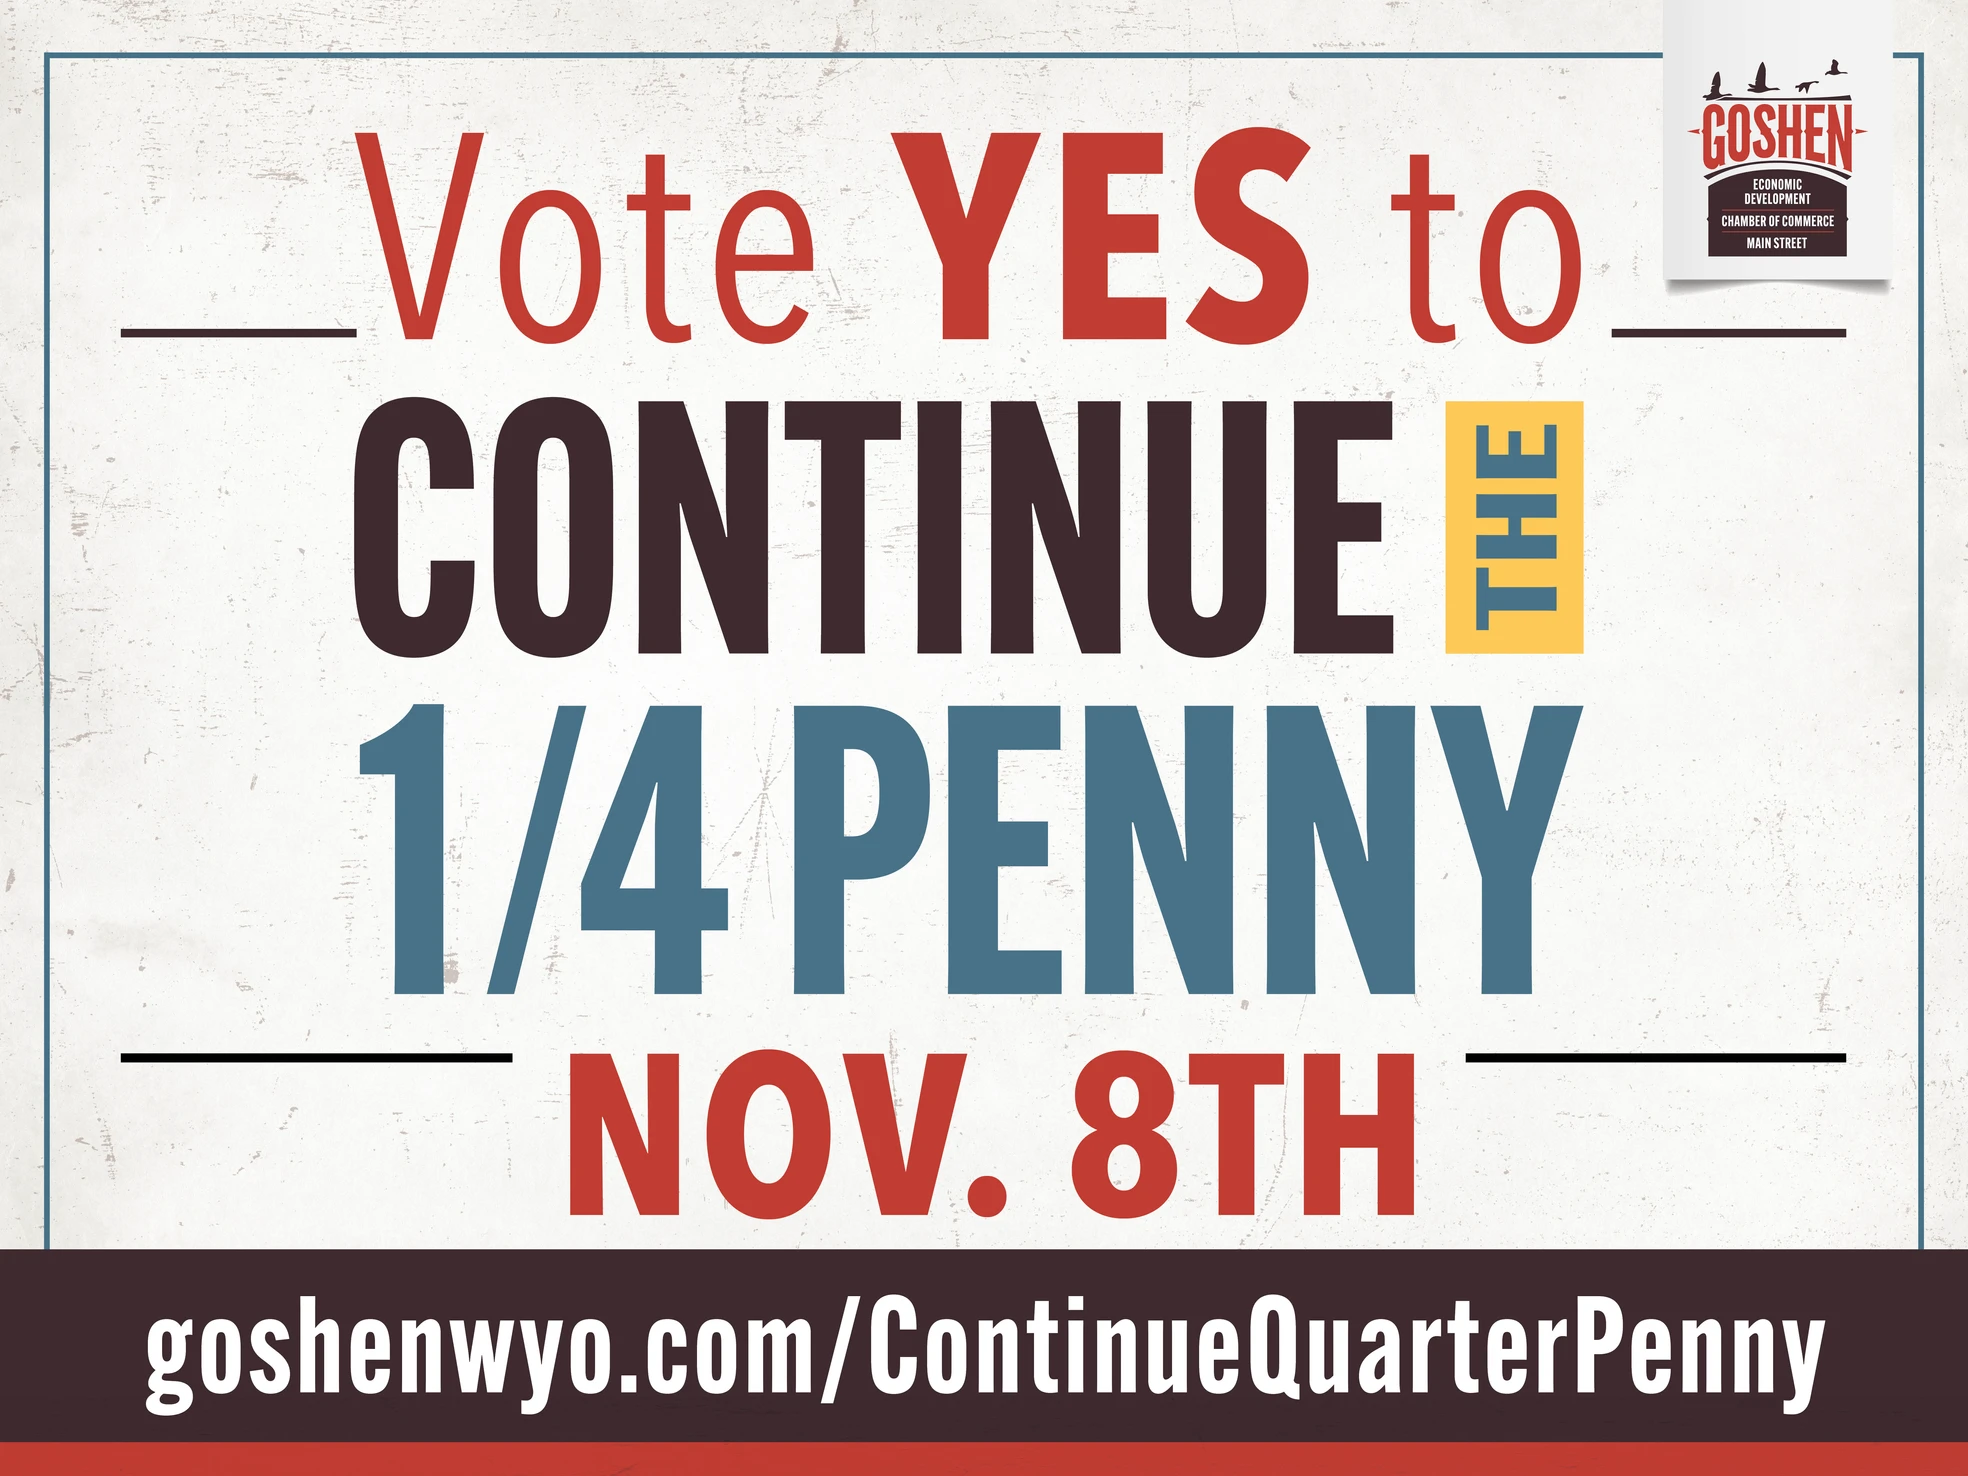 a graphic for the 1/4 penny sales tax